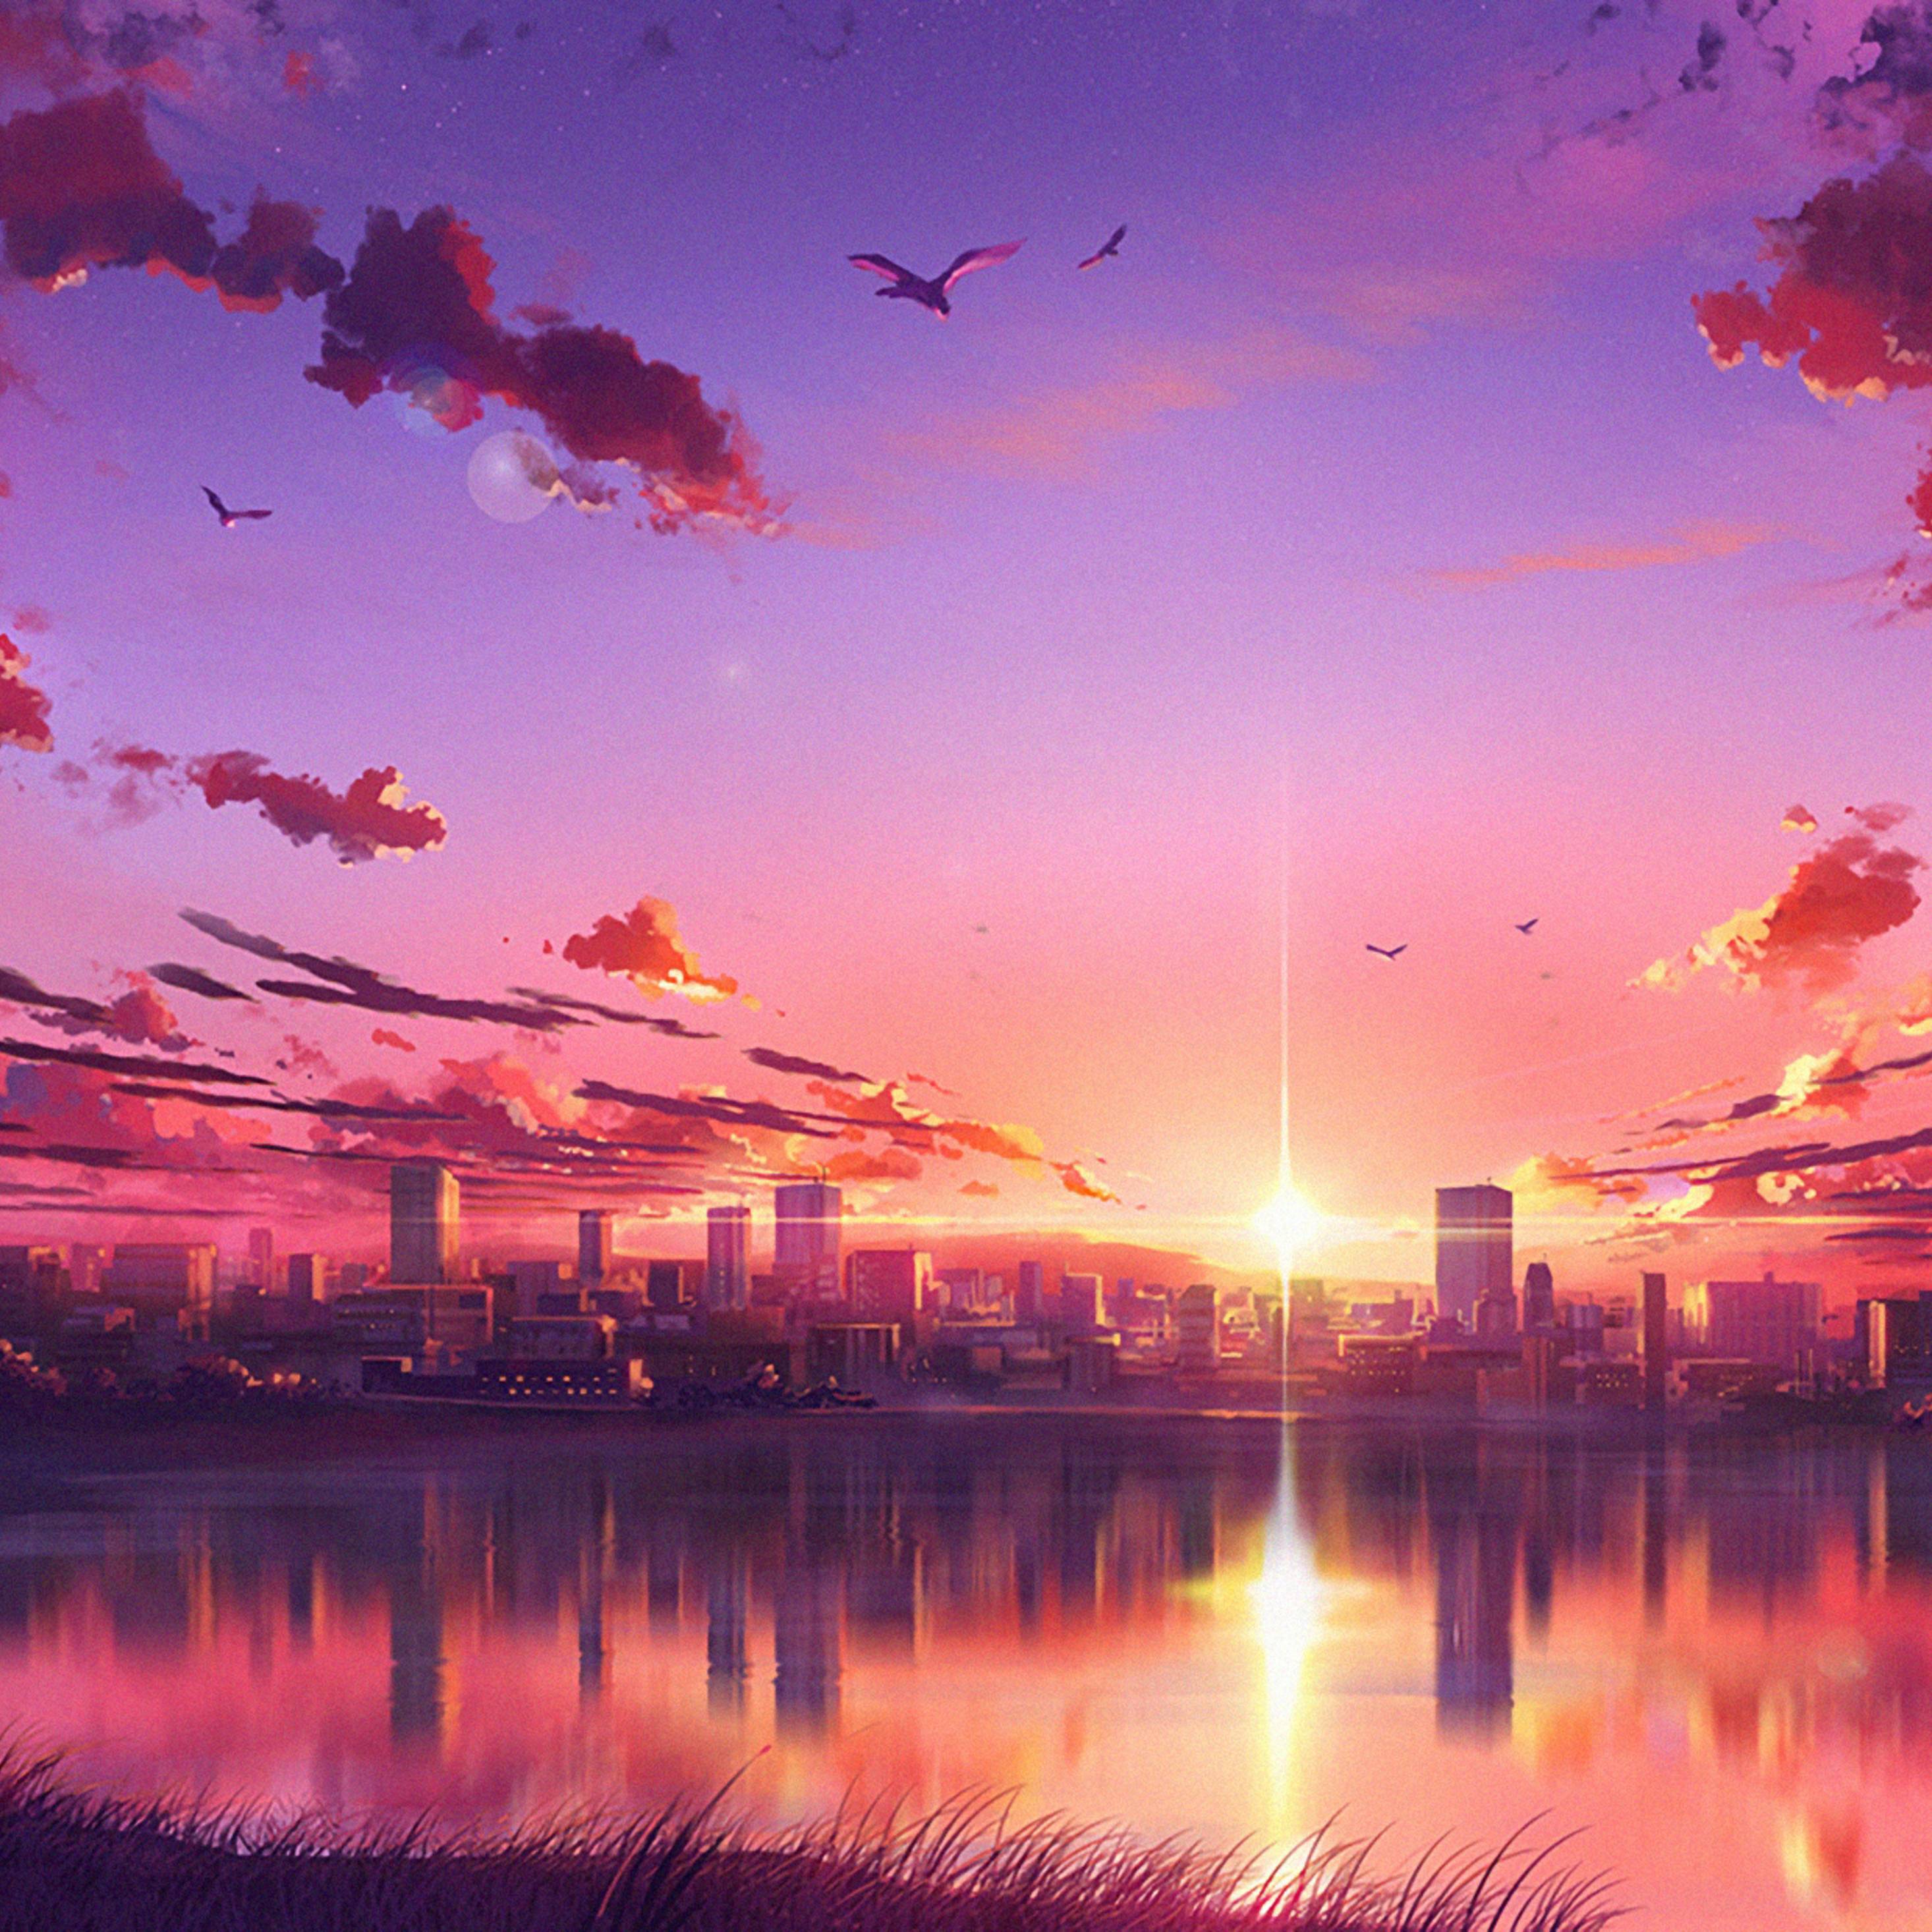 A pink and purple sunset over a city - Anime sunset, sunset